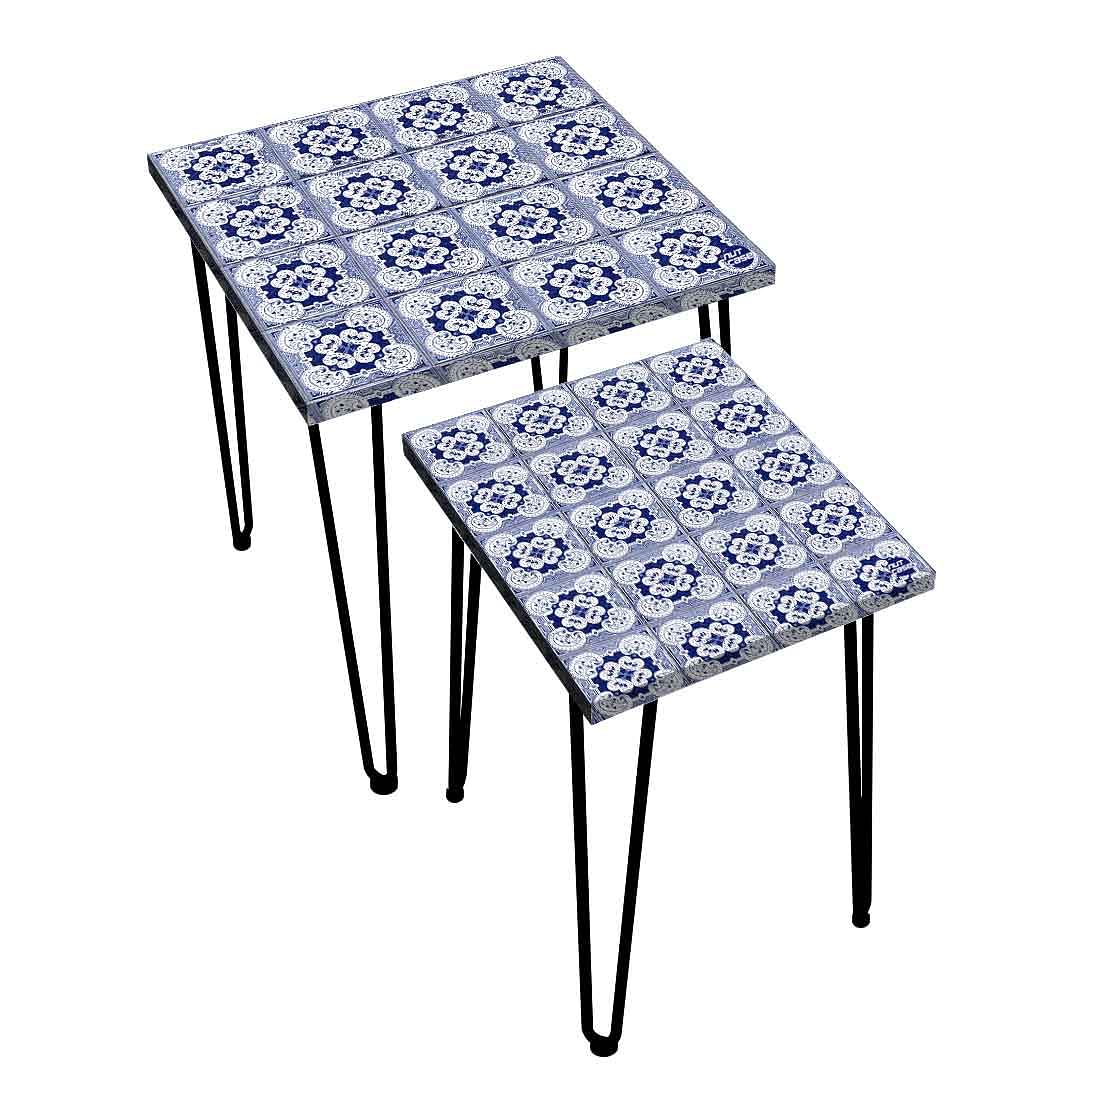 Side Table for Bedroom Square Nesting Table Living Room Office and Home - Spanish Tiles Nutcase